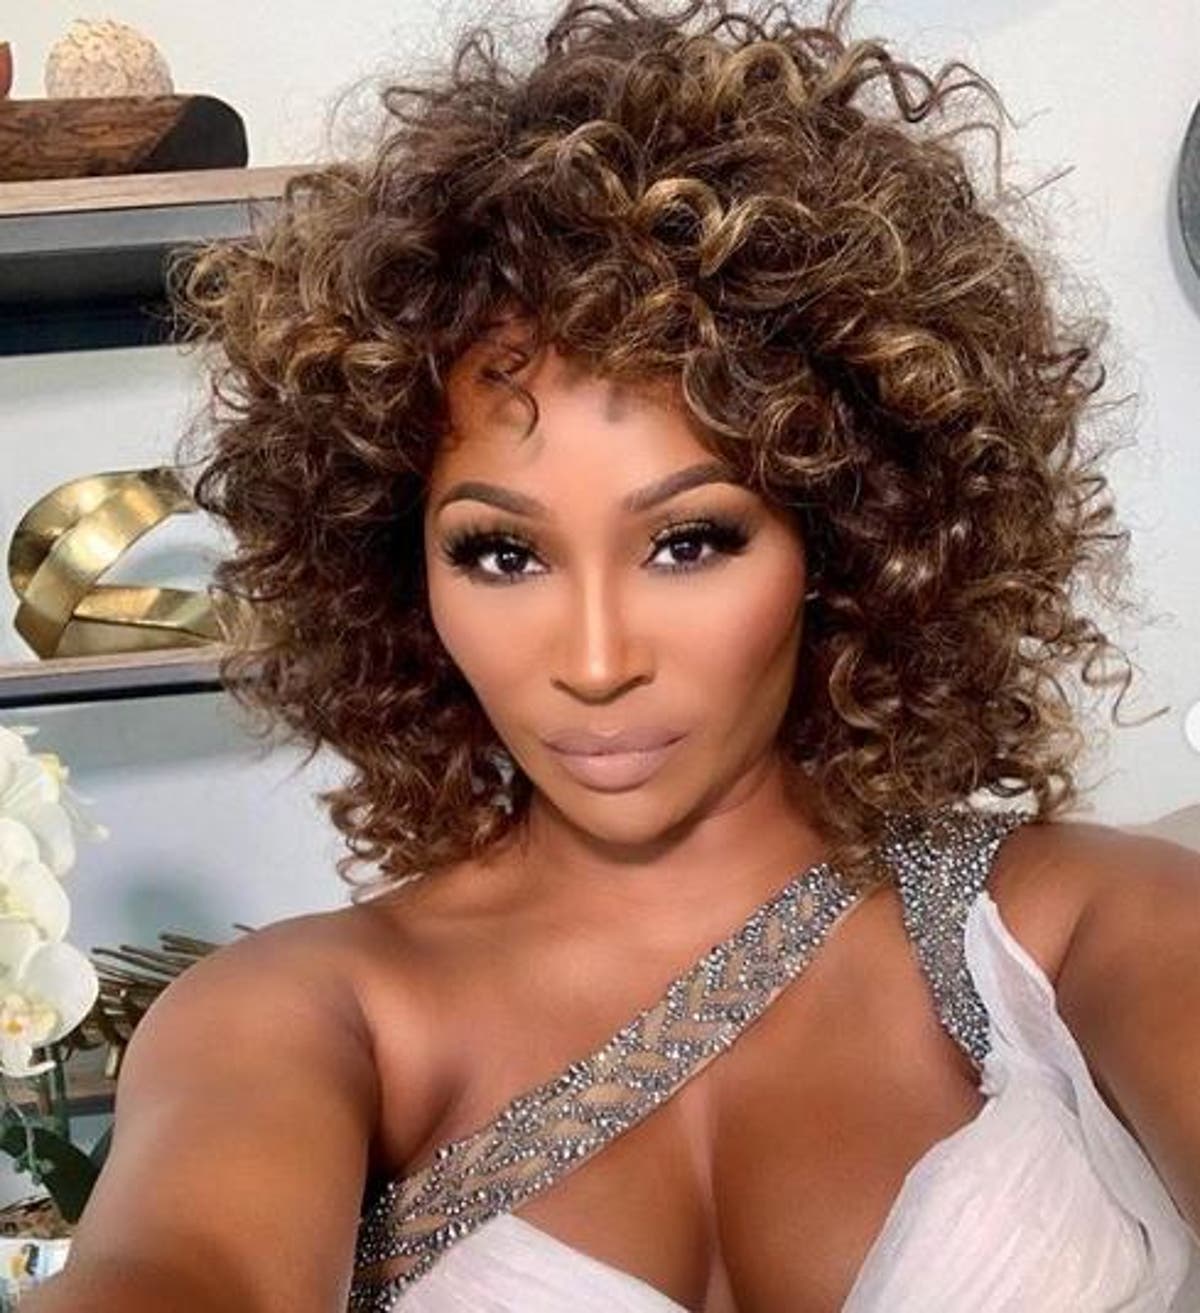 Cynthia Bailey Shares A Photo Of Her Mother And Fans Are Impressed